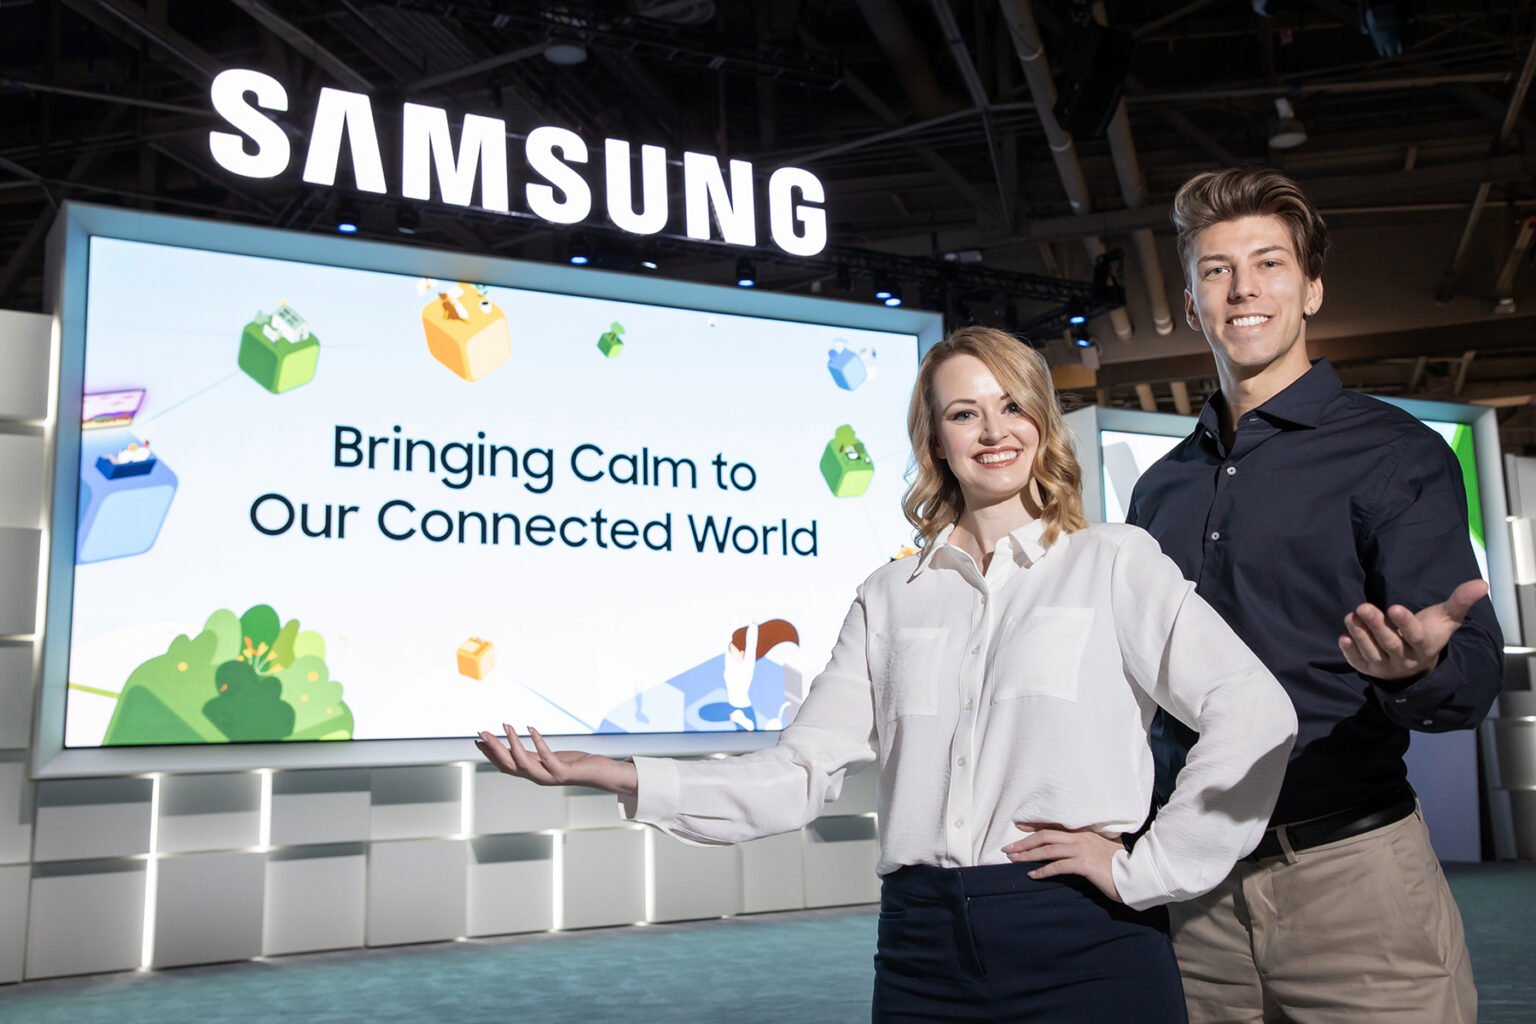 Samsung Shares Vision for Connected Device Experience at CES 2023